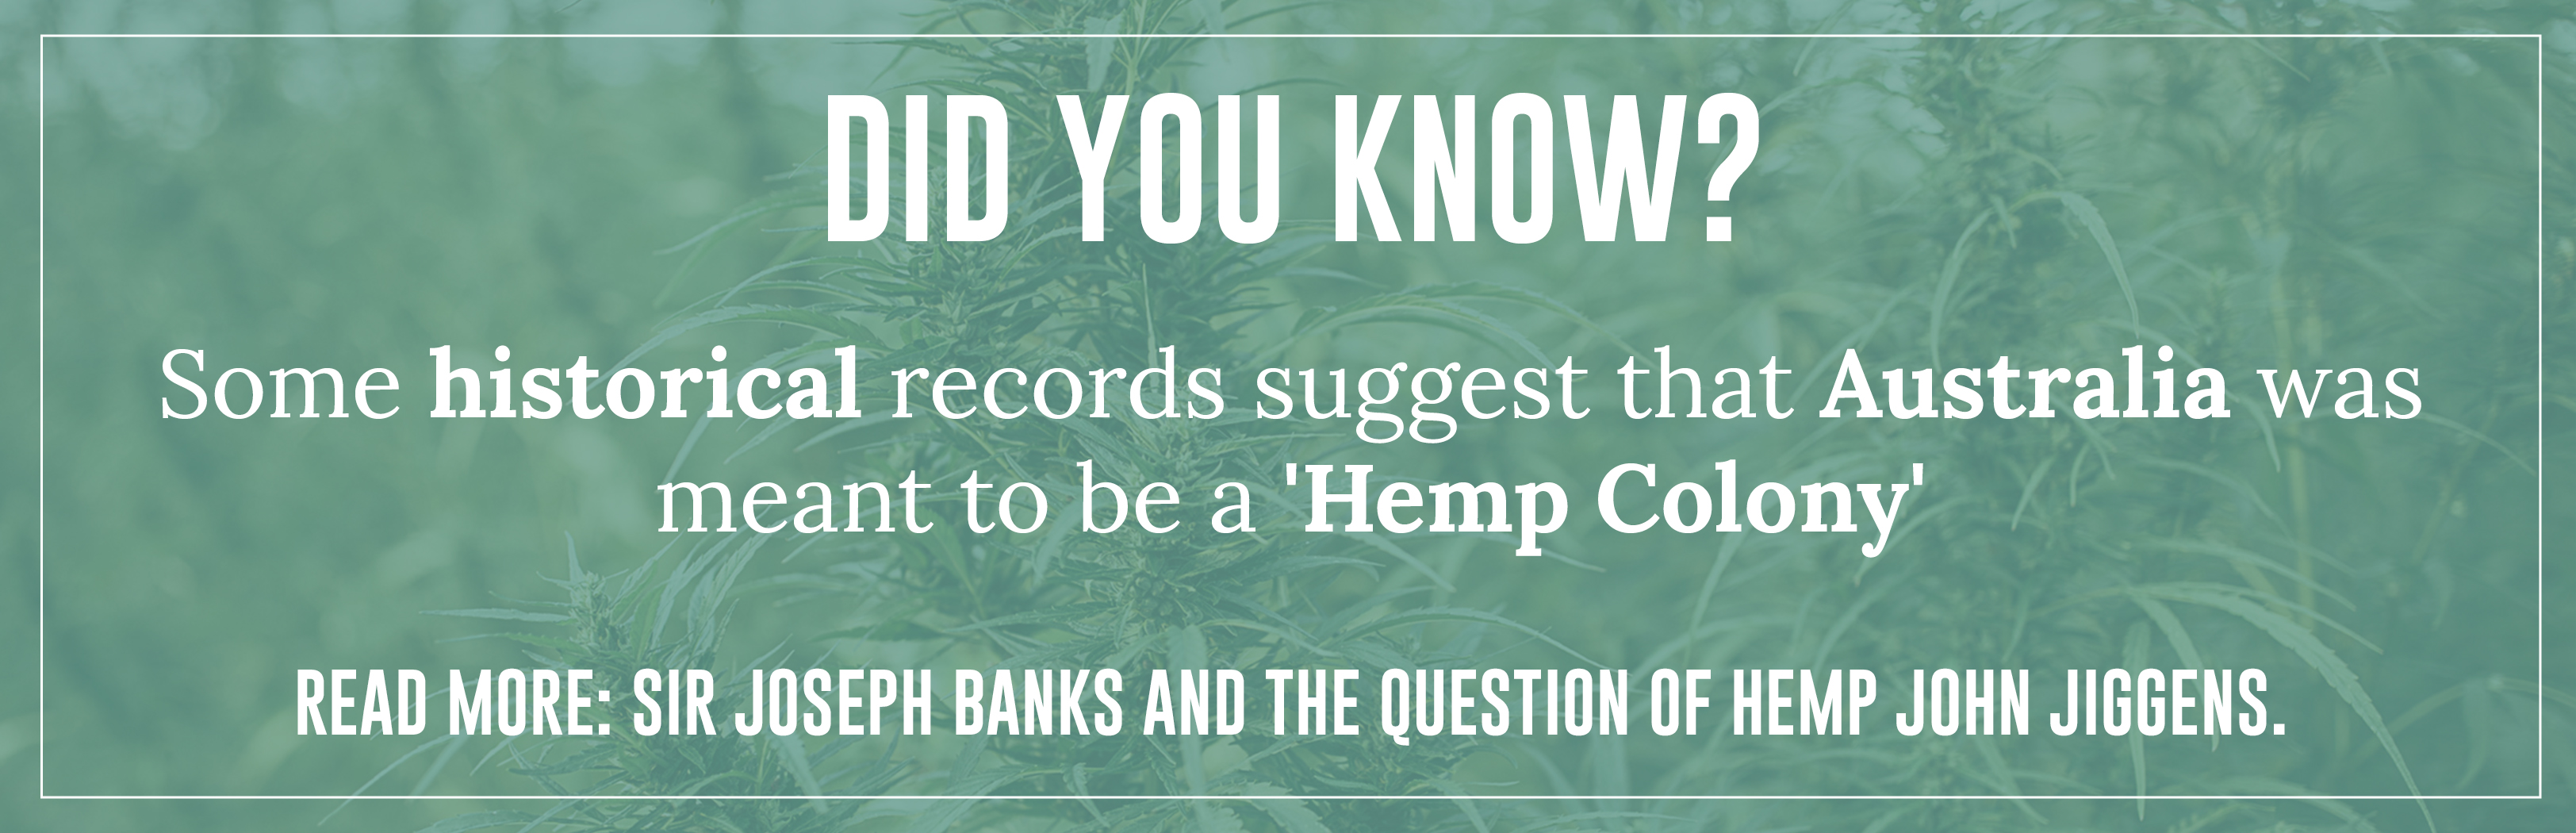 Some historical records suggest that Australia was meant to be a 'Hemp Colony'